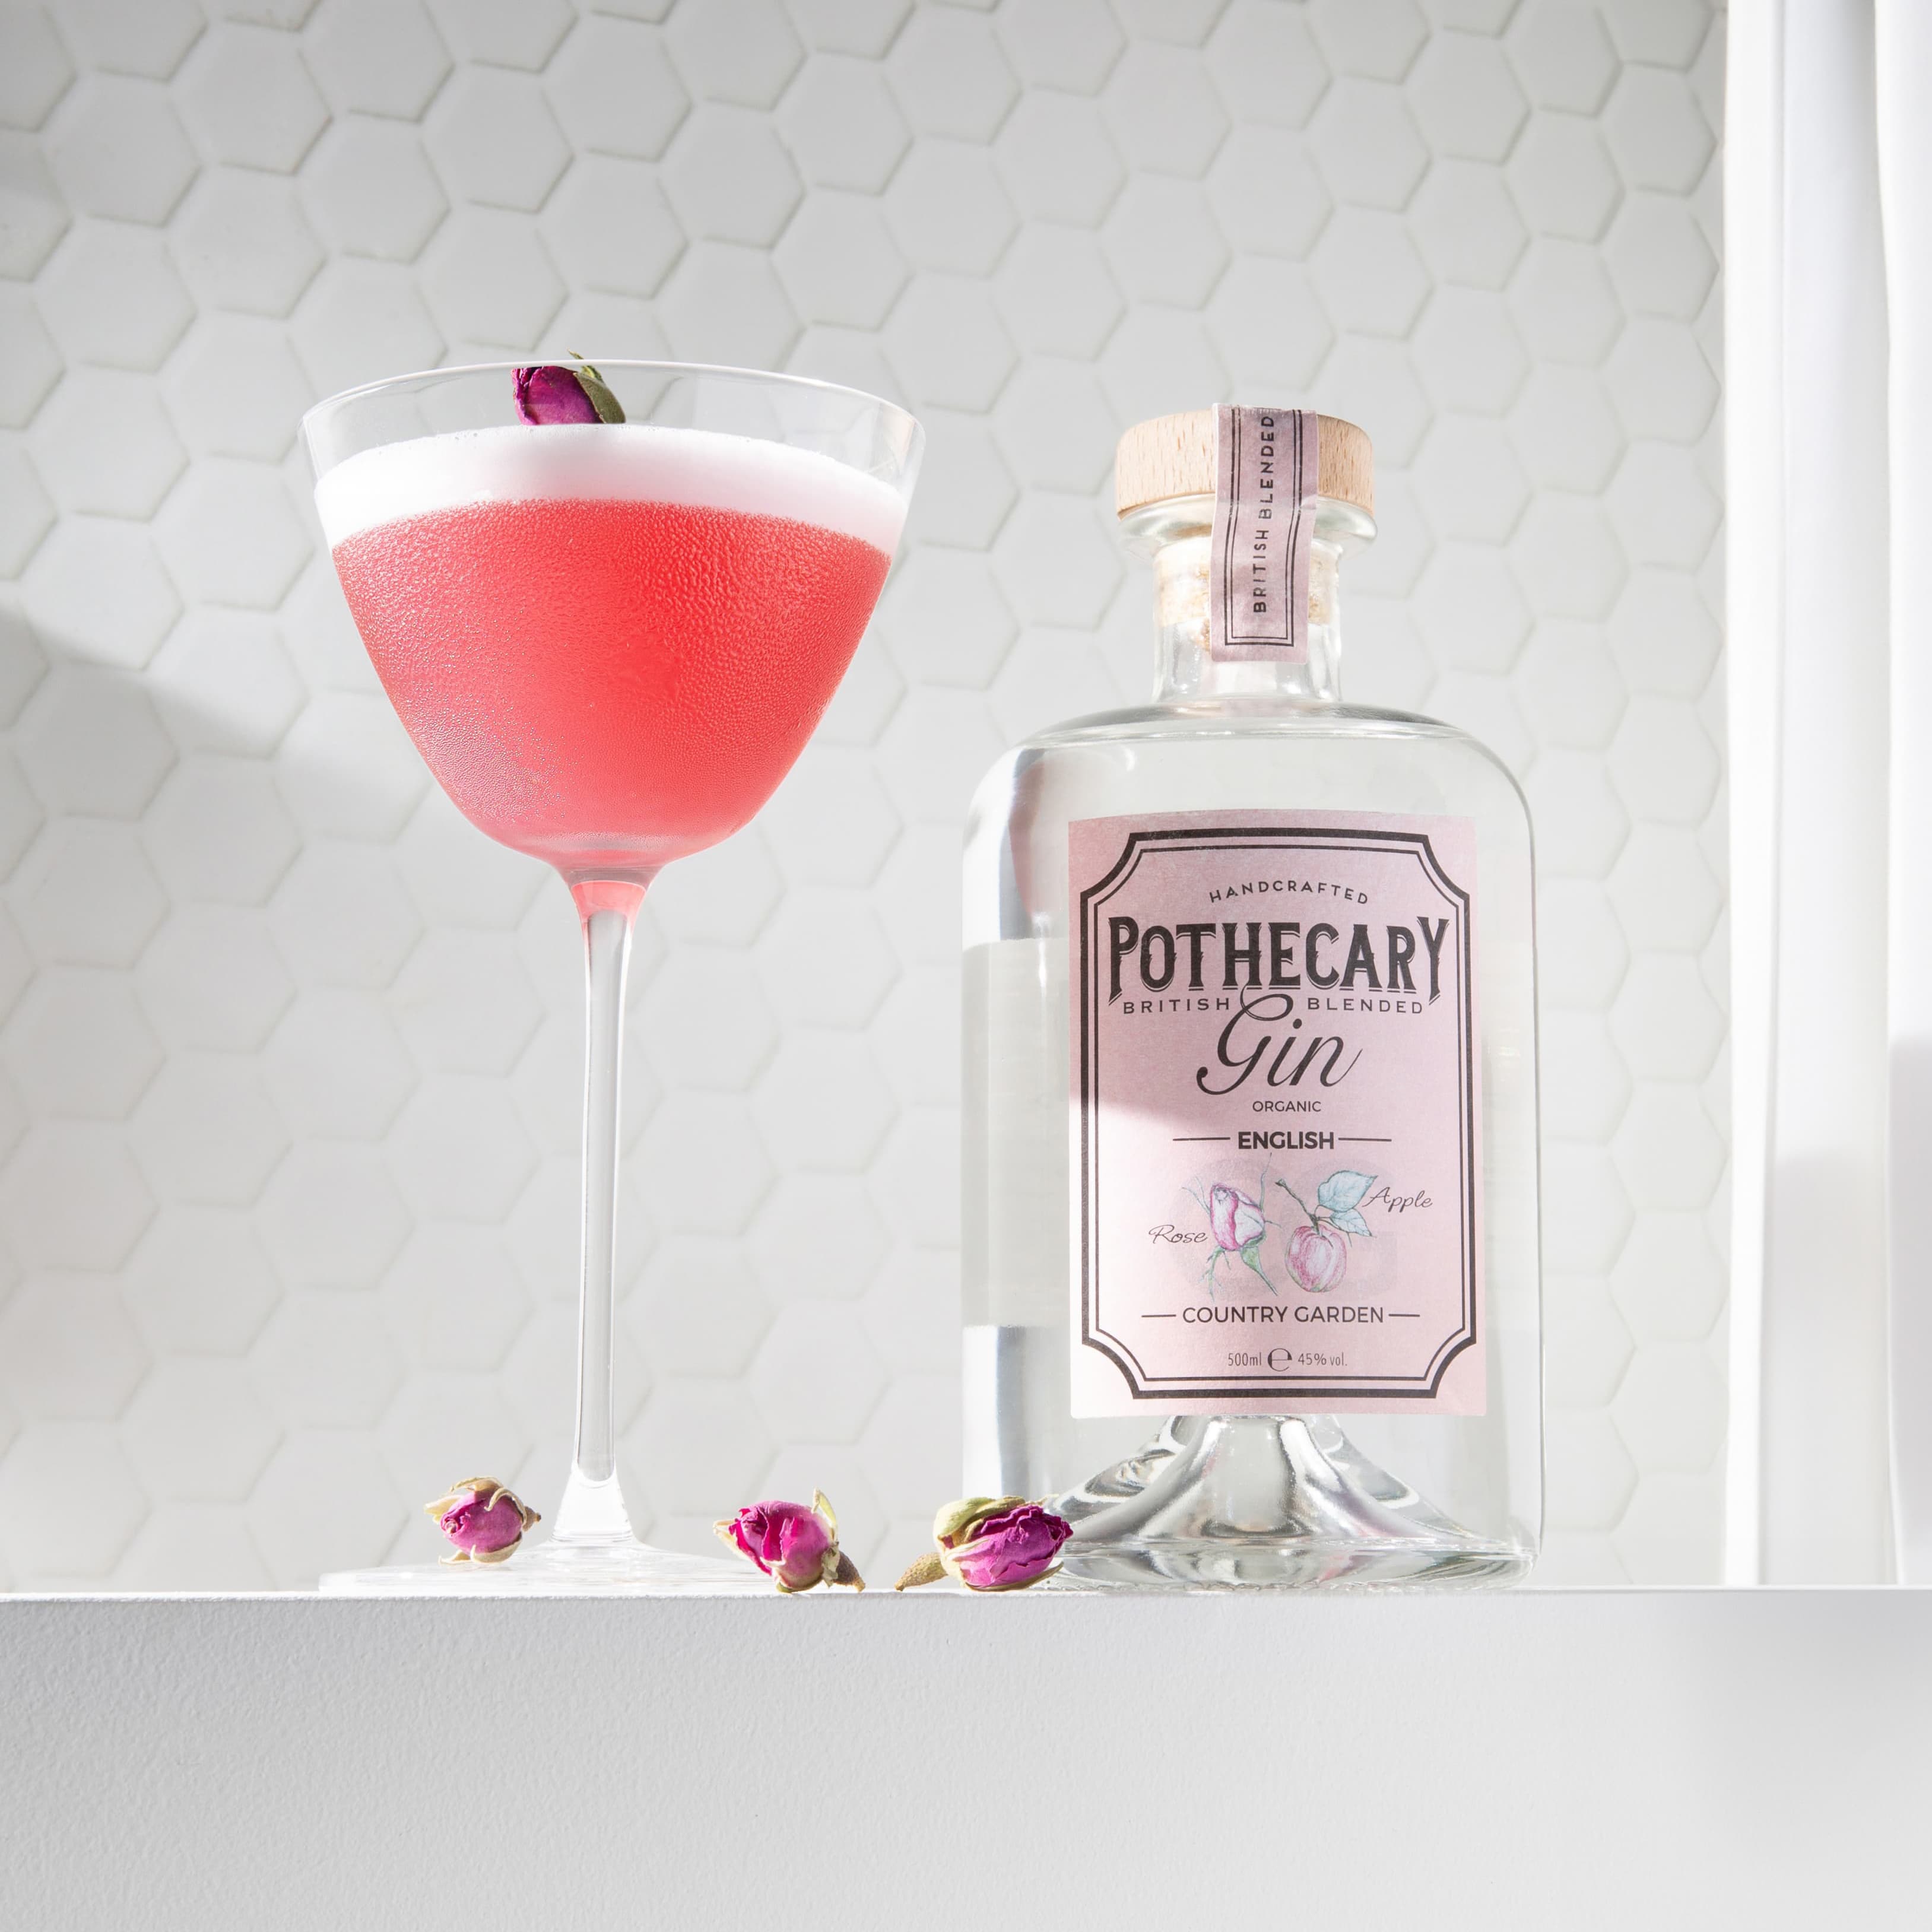 Pothecary Gin Cocktail Recipe With Tea Lab Organic Rose Buds